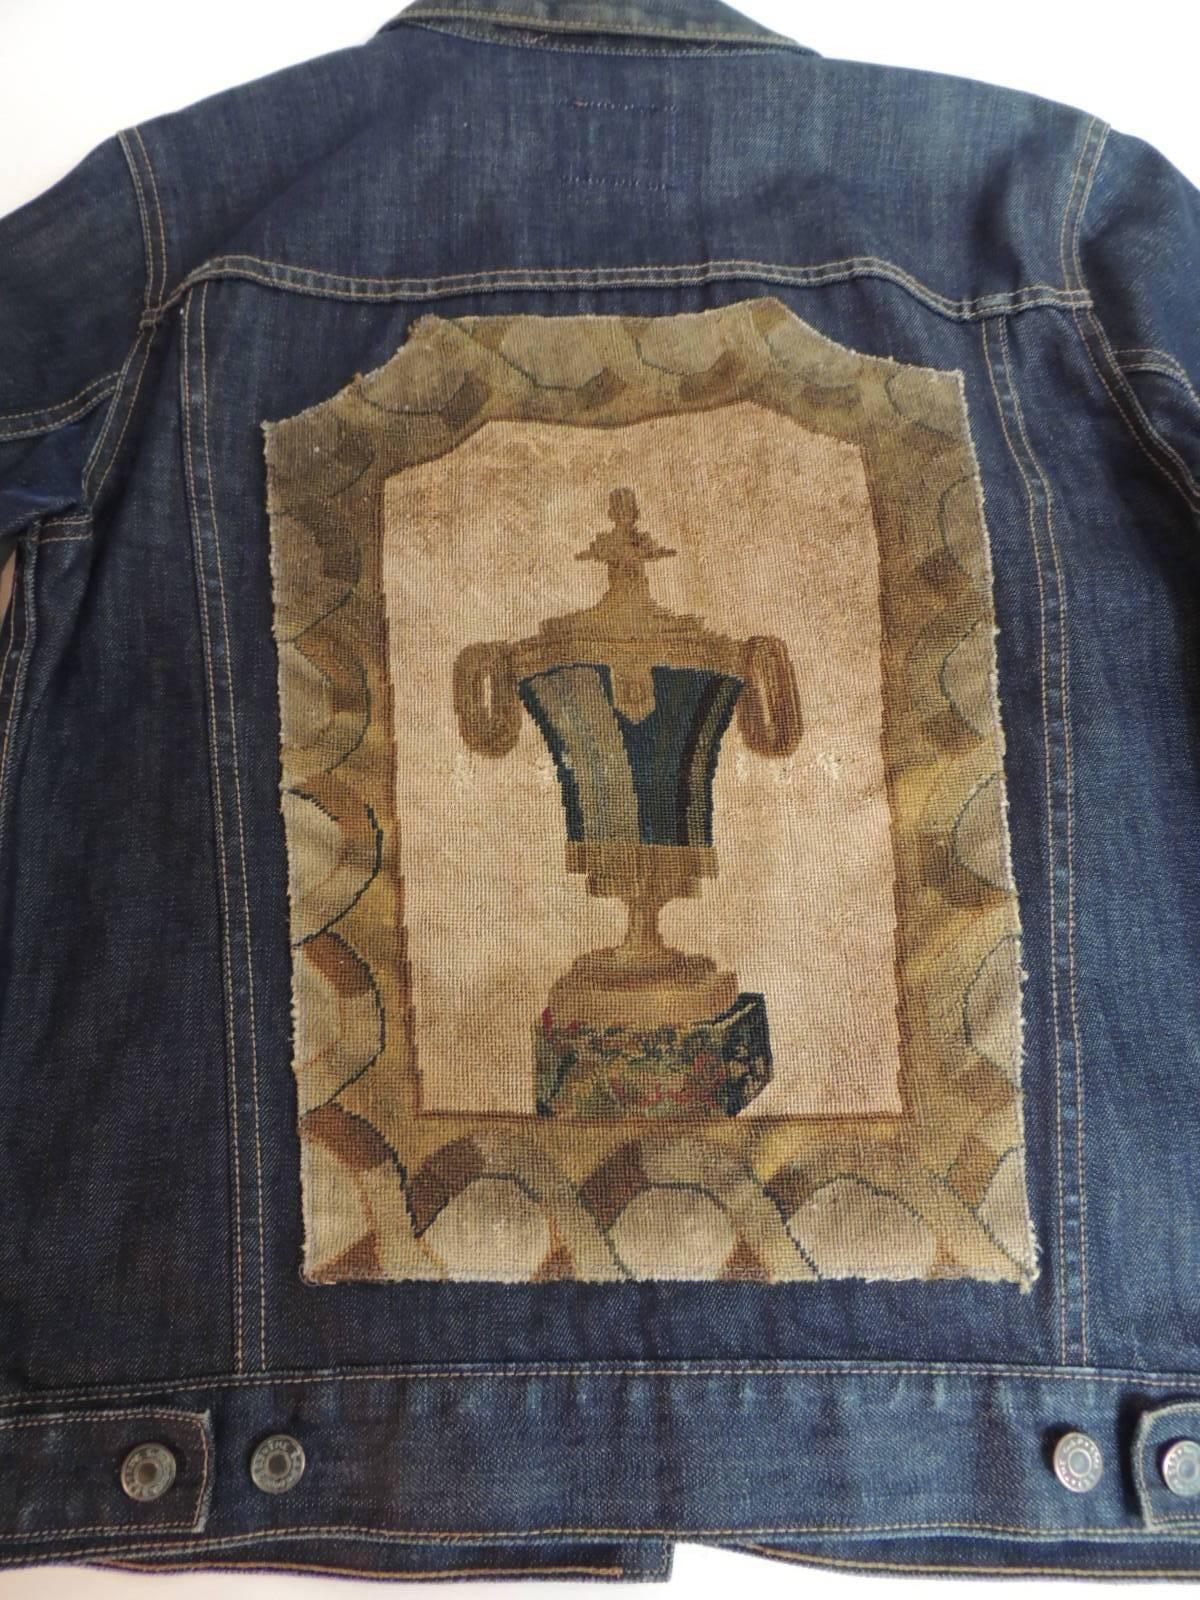 Antique Textiles Galleries:
A.T.G. custom Denim jacket with a 19th century inset Aubusson tapestry panel
Hand-stitched by the Atelier Lam workroom the back of this vintage gap denim jacket is embellished with a unique fragment of a 19th century